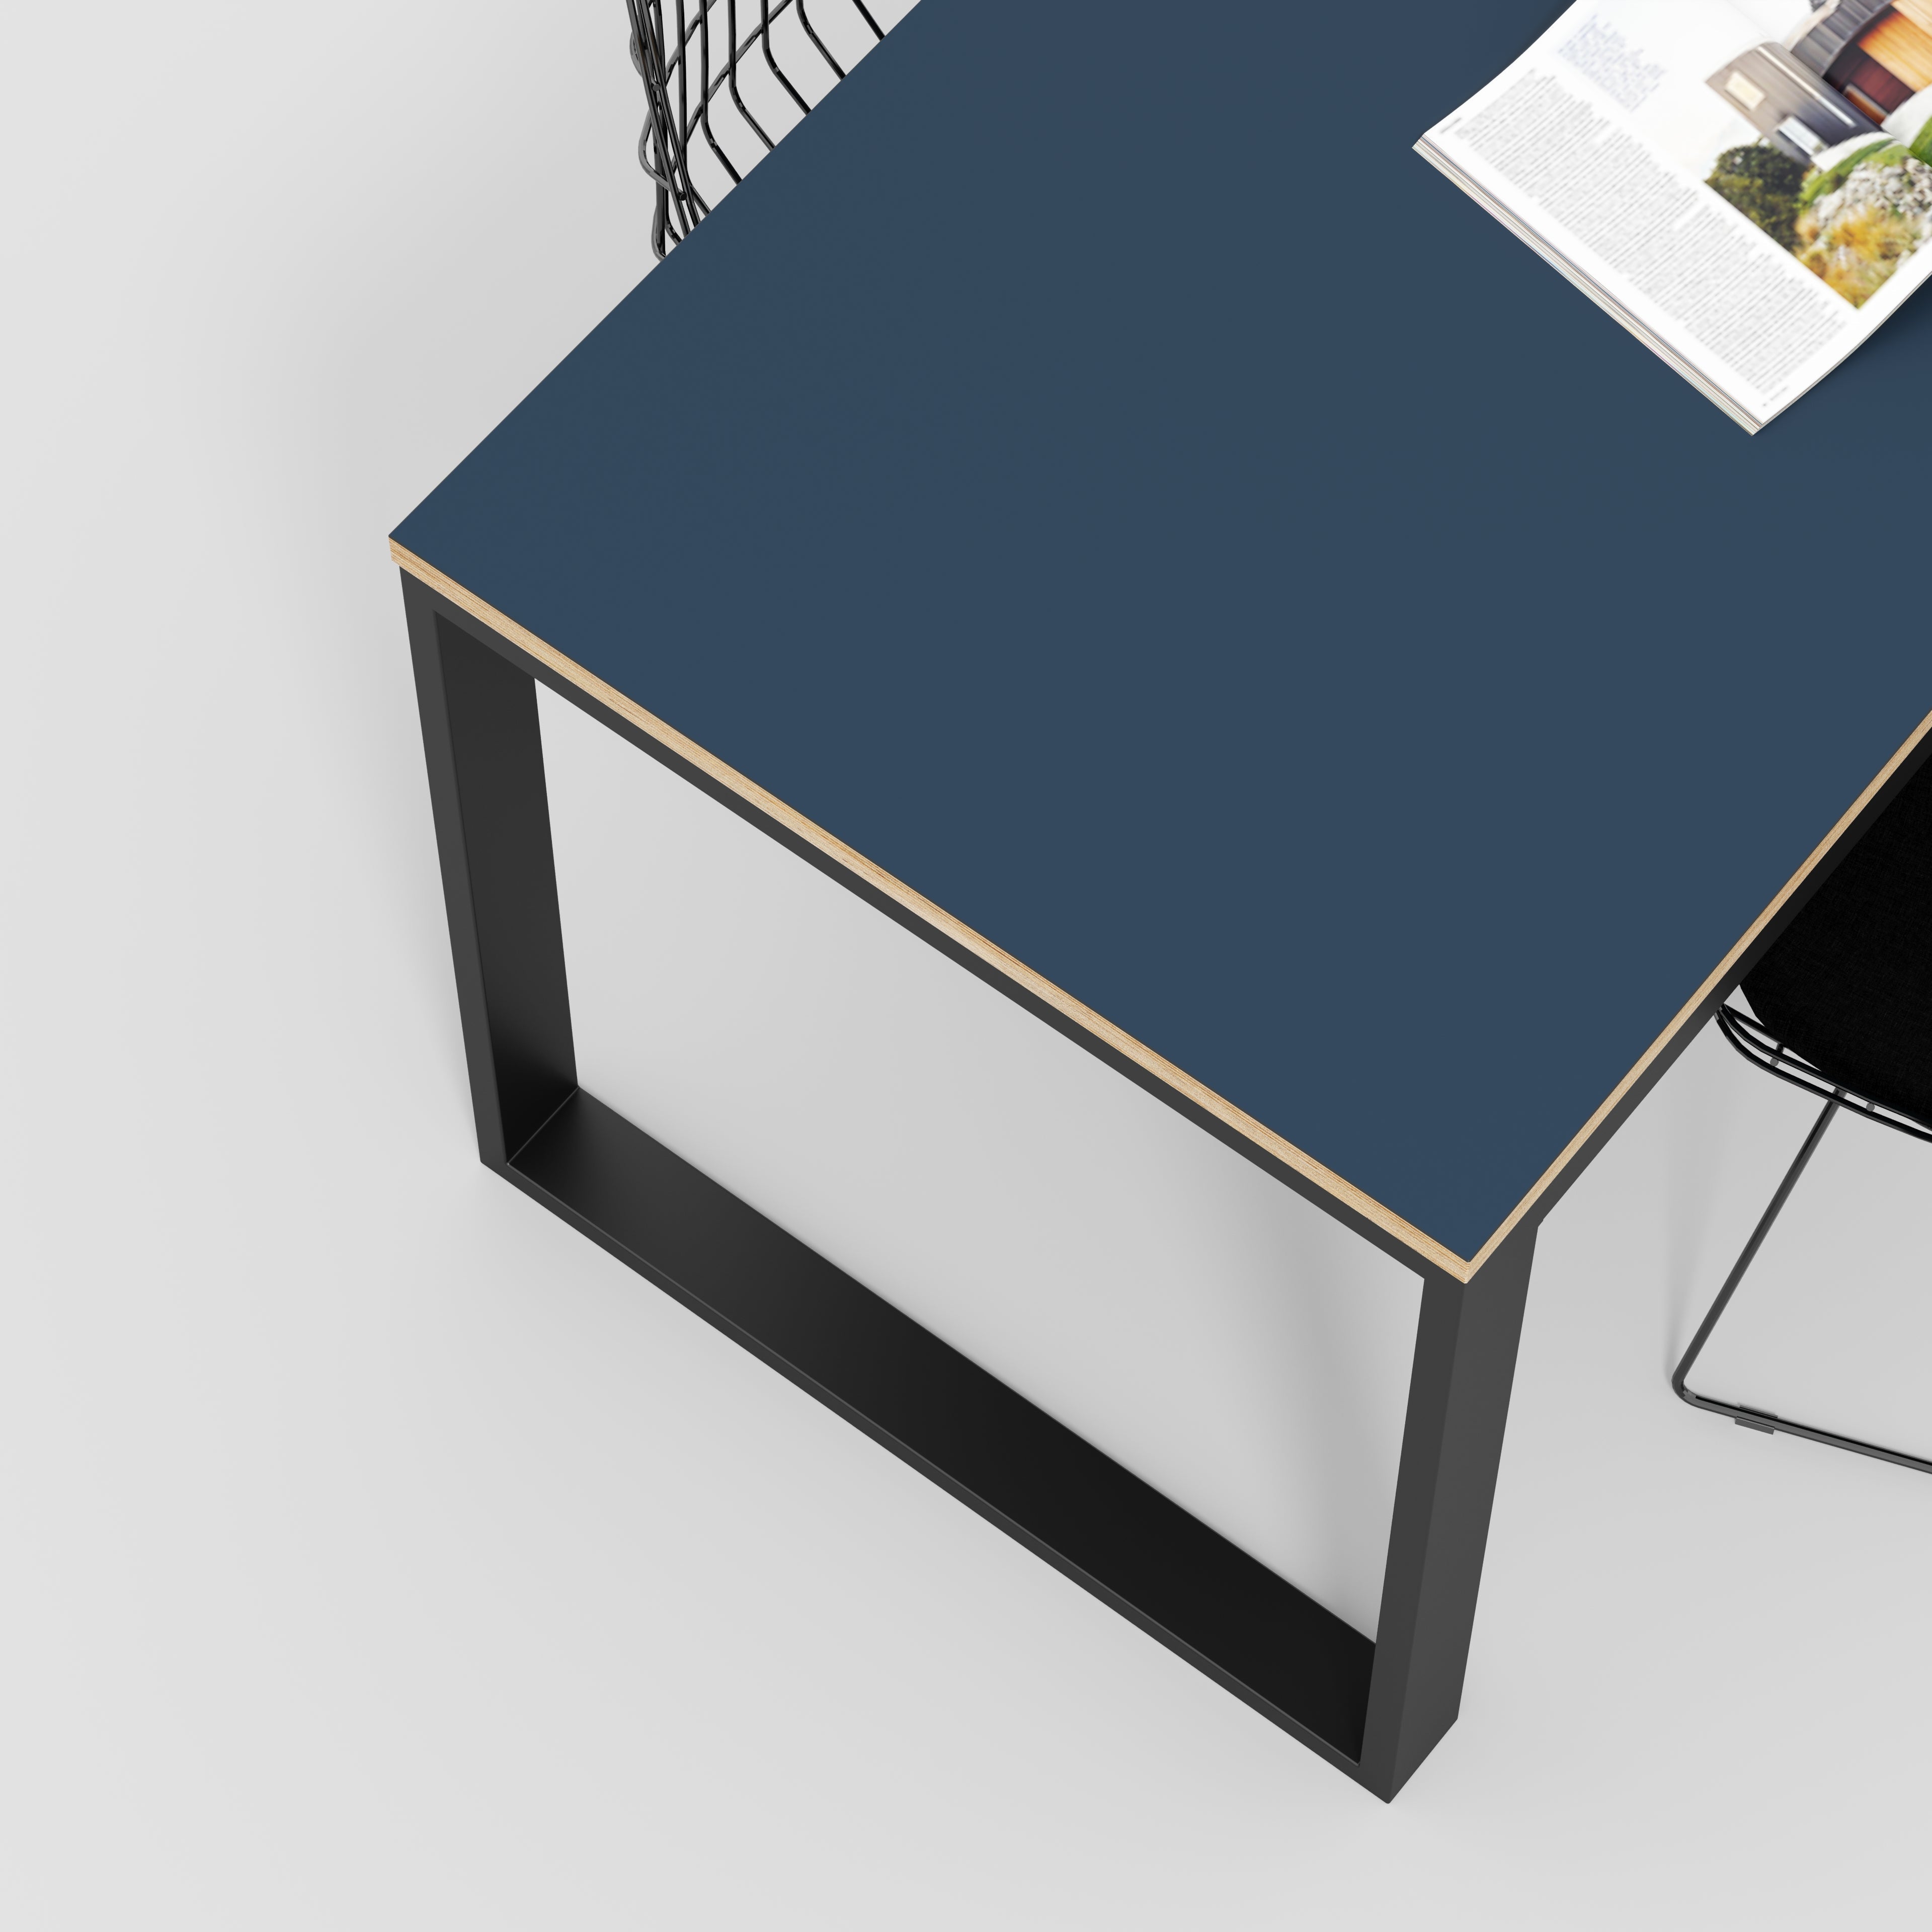 Table with Black Industrial Frame - Formica Night Sea Blue - 1800(w) x 745(d) x 735(h)